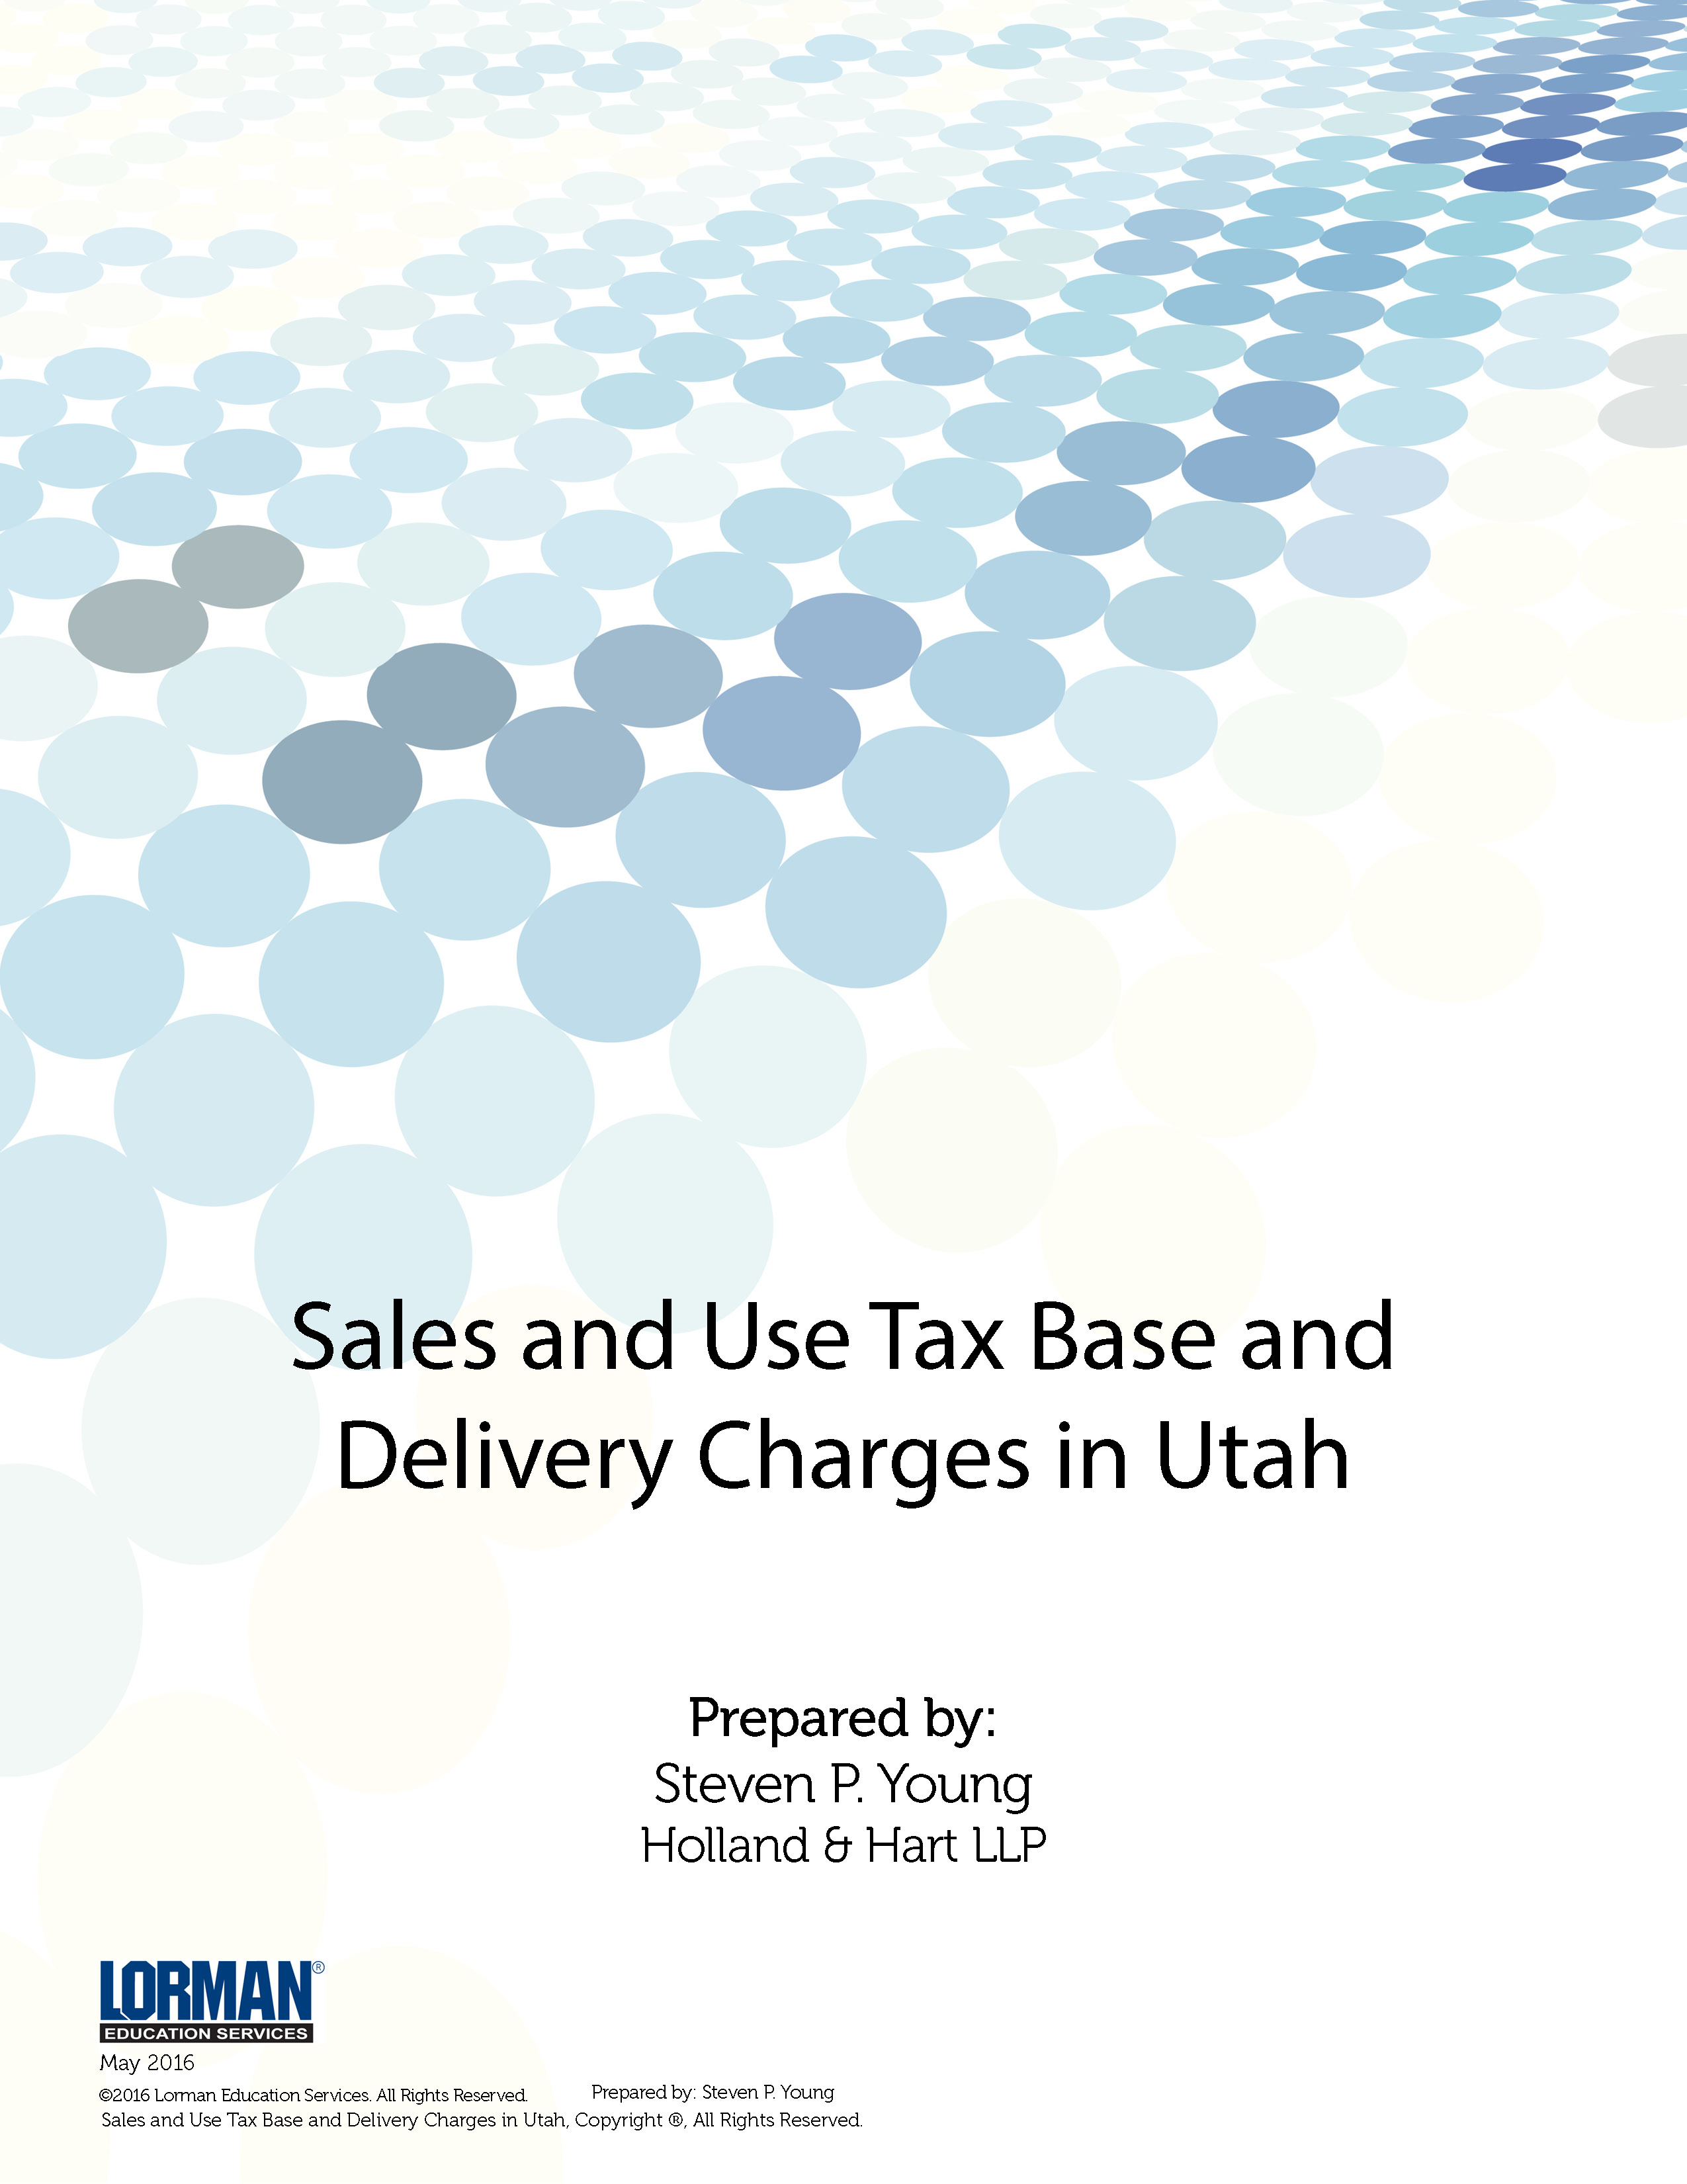 Sales and Use Tax Base and Delivery Charges in Utah